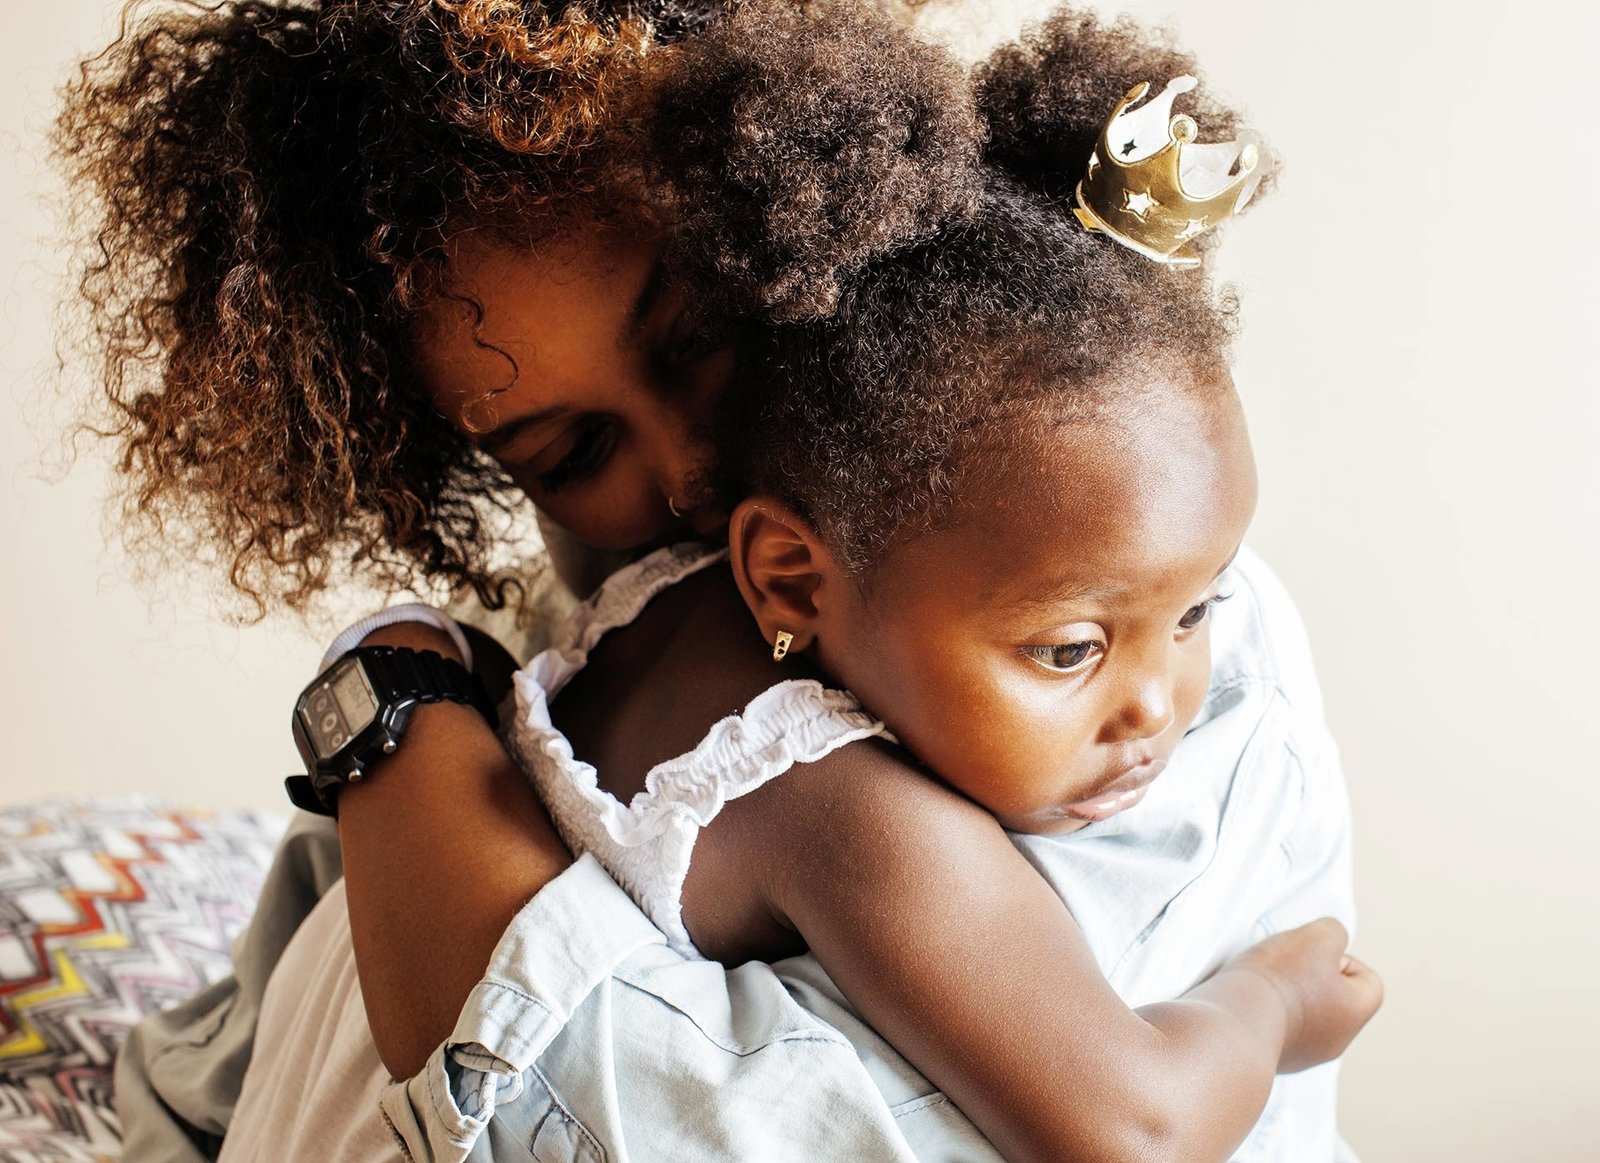 Loving Black mother hugging her toddler warmly, radiating joy and affection in a family moment. Discover more heartwarming stories at Successful Black Parenting Magazine.